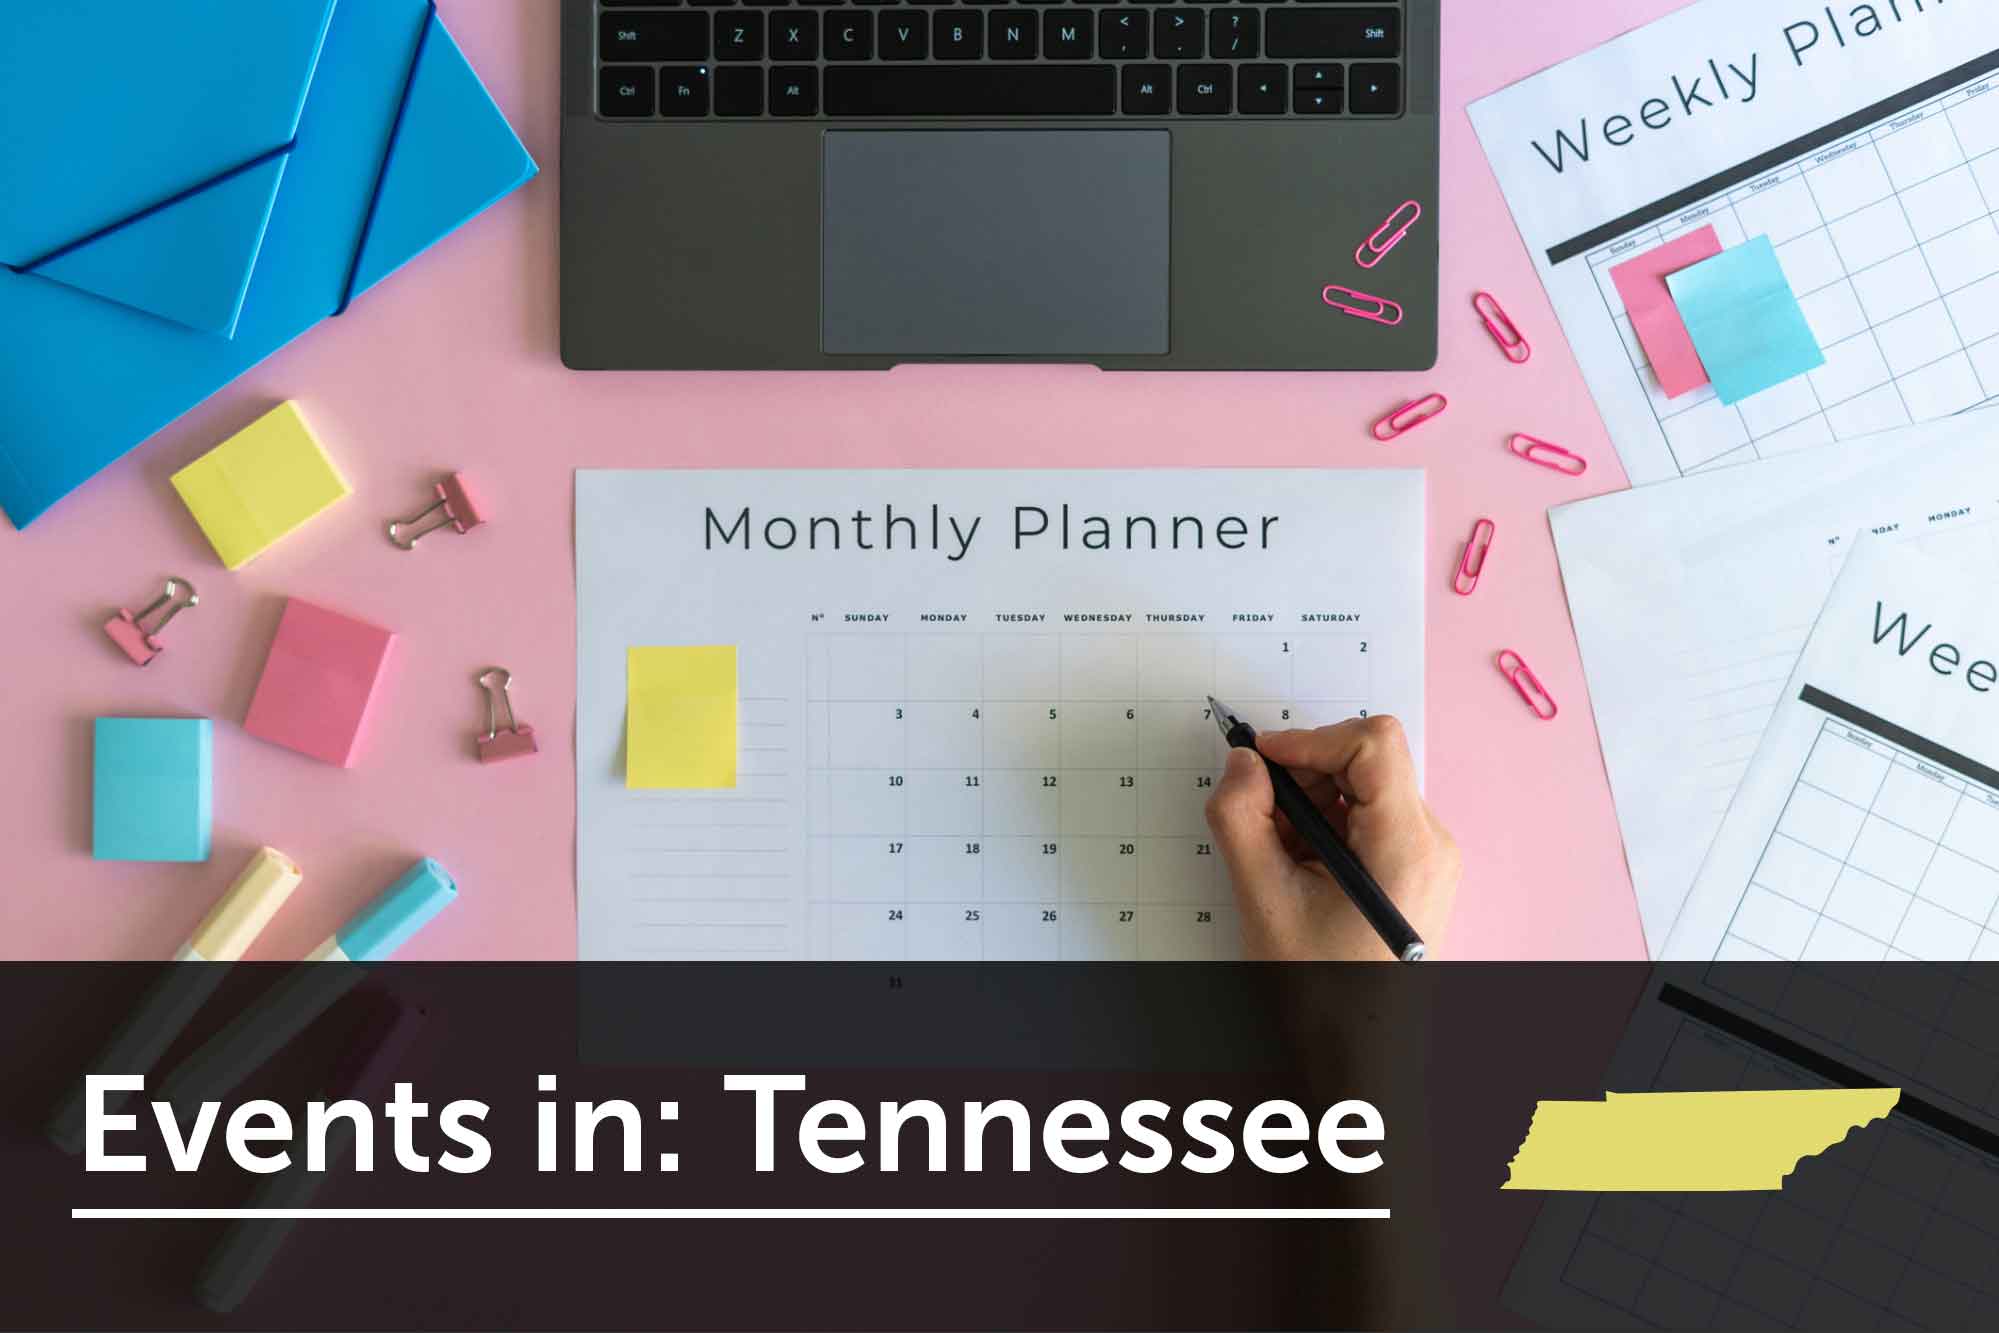 Women's business events in Tennessee